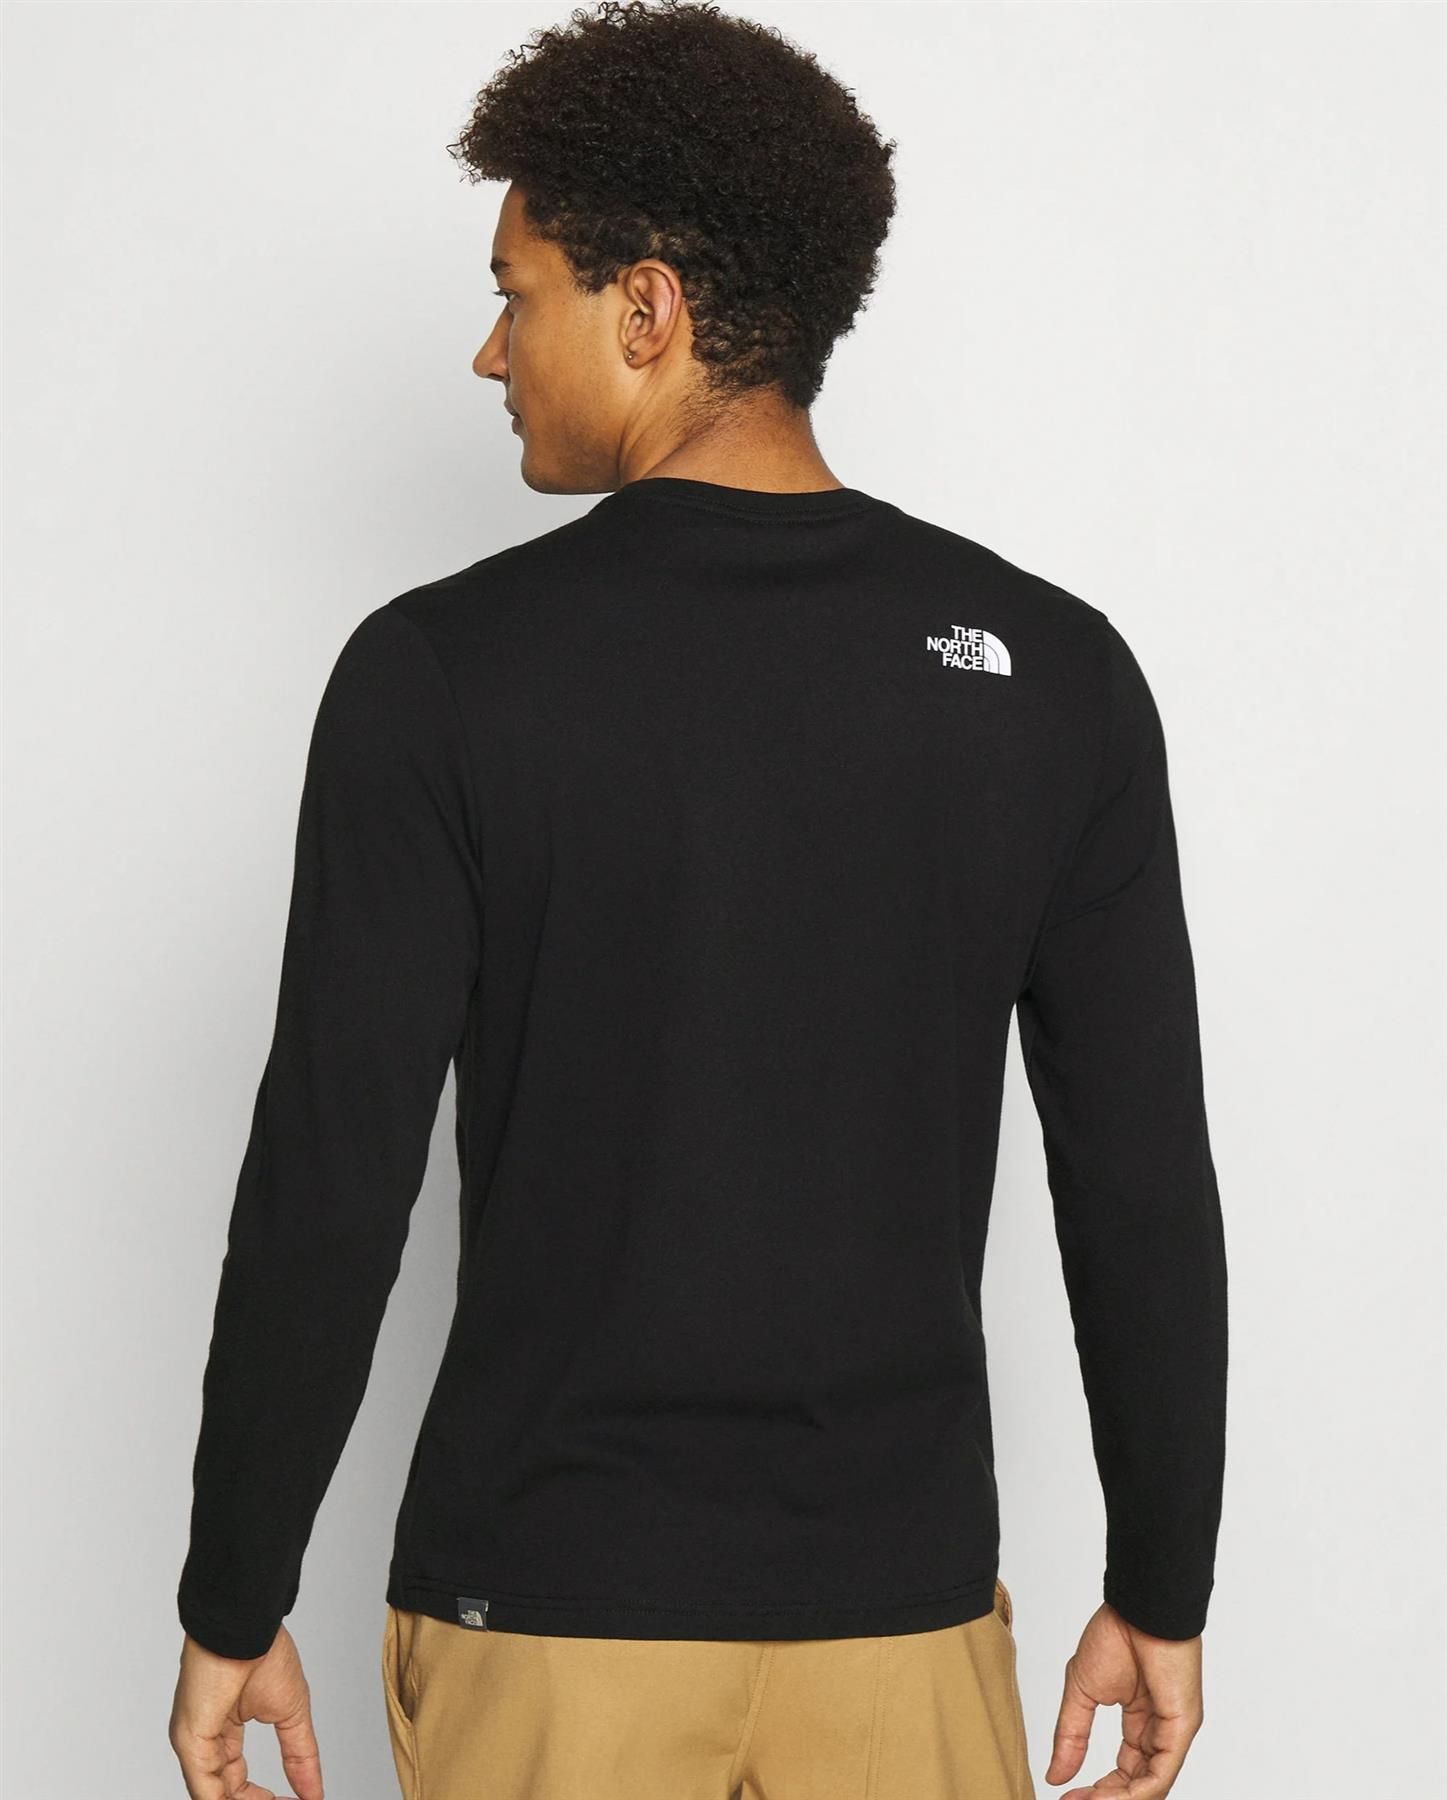 The North Face Mens Graphic Print T Shirt.      
Long Sleeve T-shirt with Graphic on Centre Chest.      
The Logo on the Front and Back, Jersey Knit Fabric.      
The North Face Graphic Long Sleeve T-shirt Is Soft and Uncomplicated, Which Means It's Incredibly Comfortable.      
It's Smooth, Uncomplicated and Features Original Graphics.